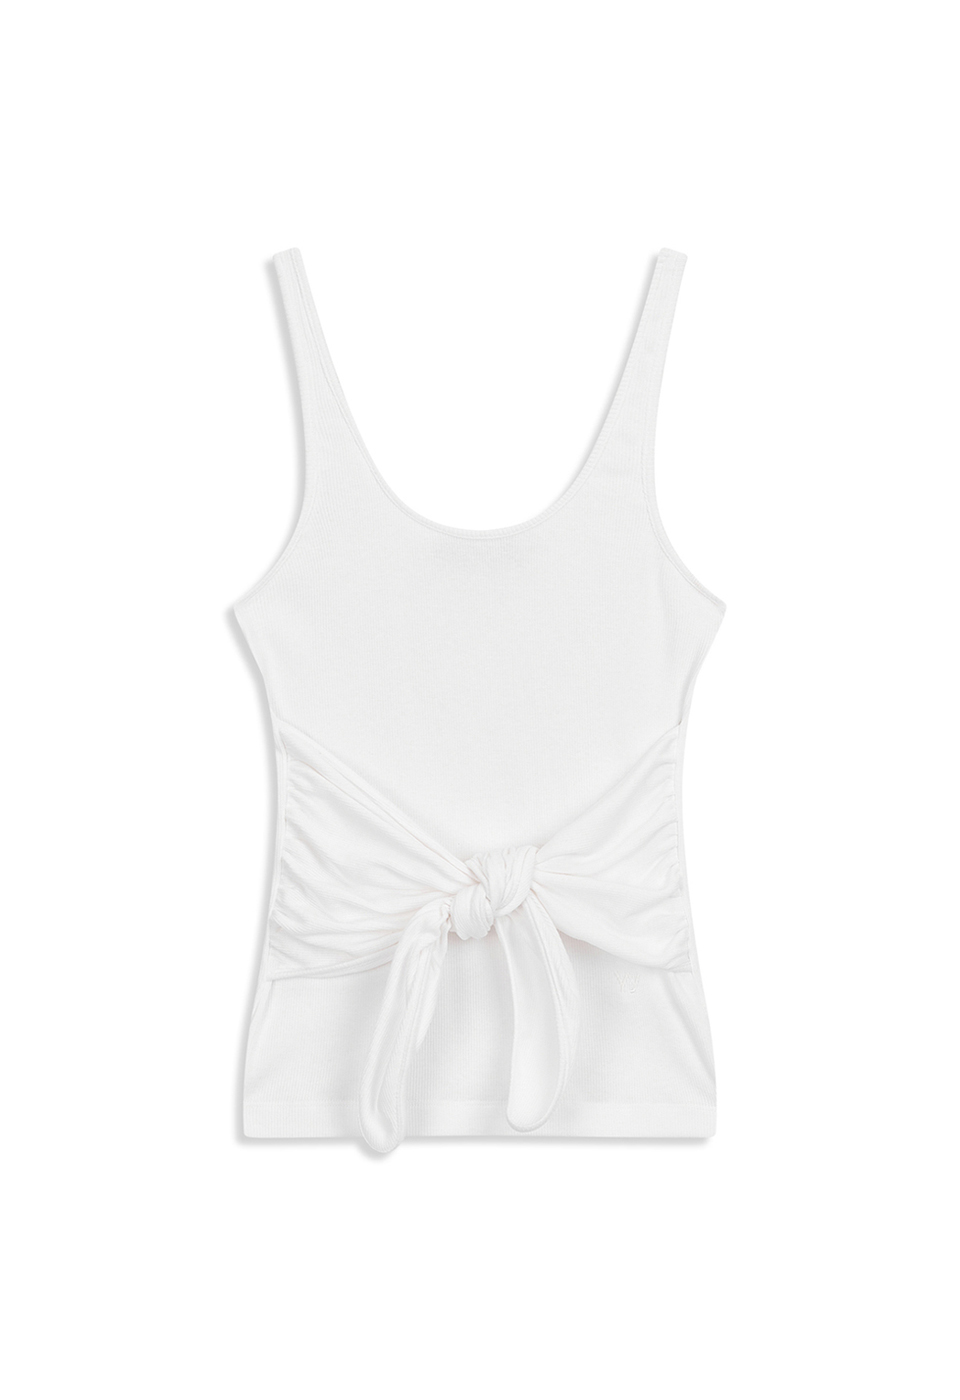 KNOTTED SLEEVELESS, WHITE